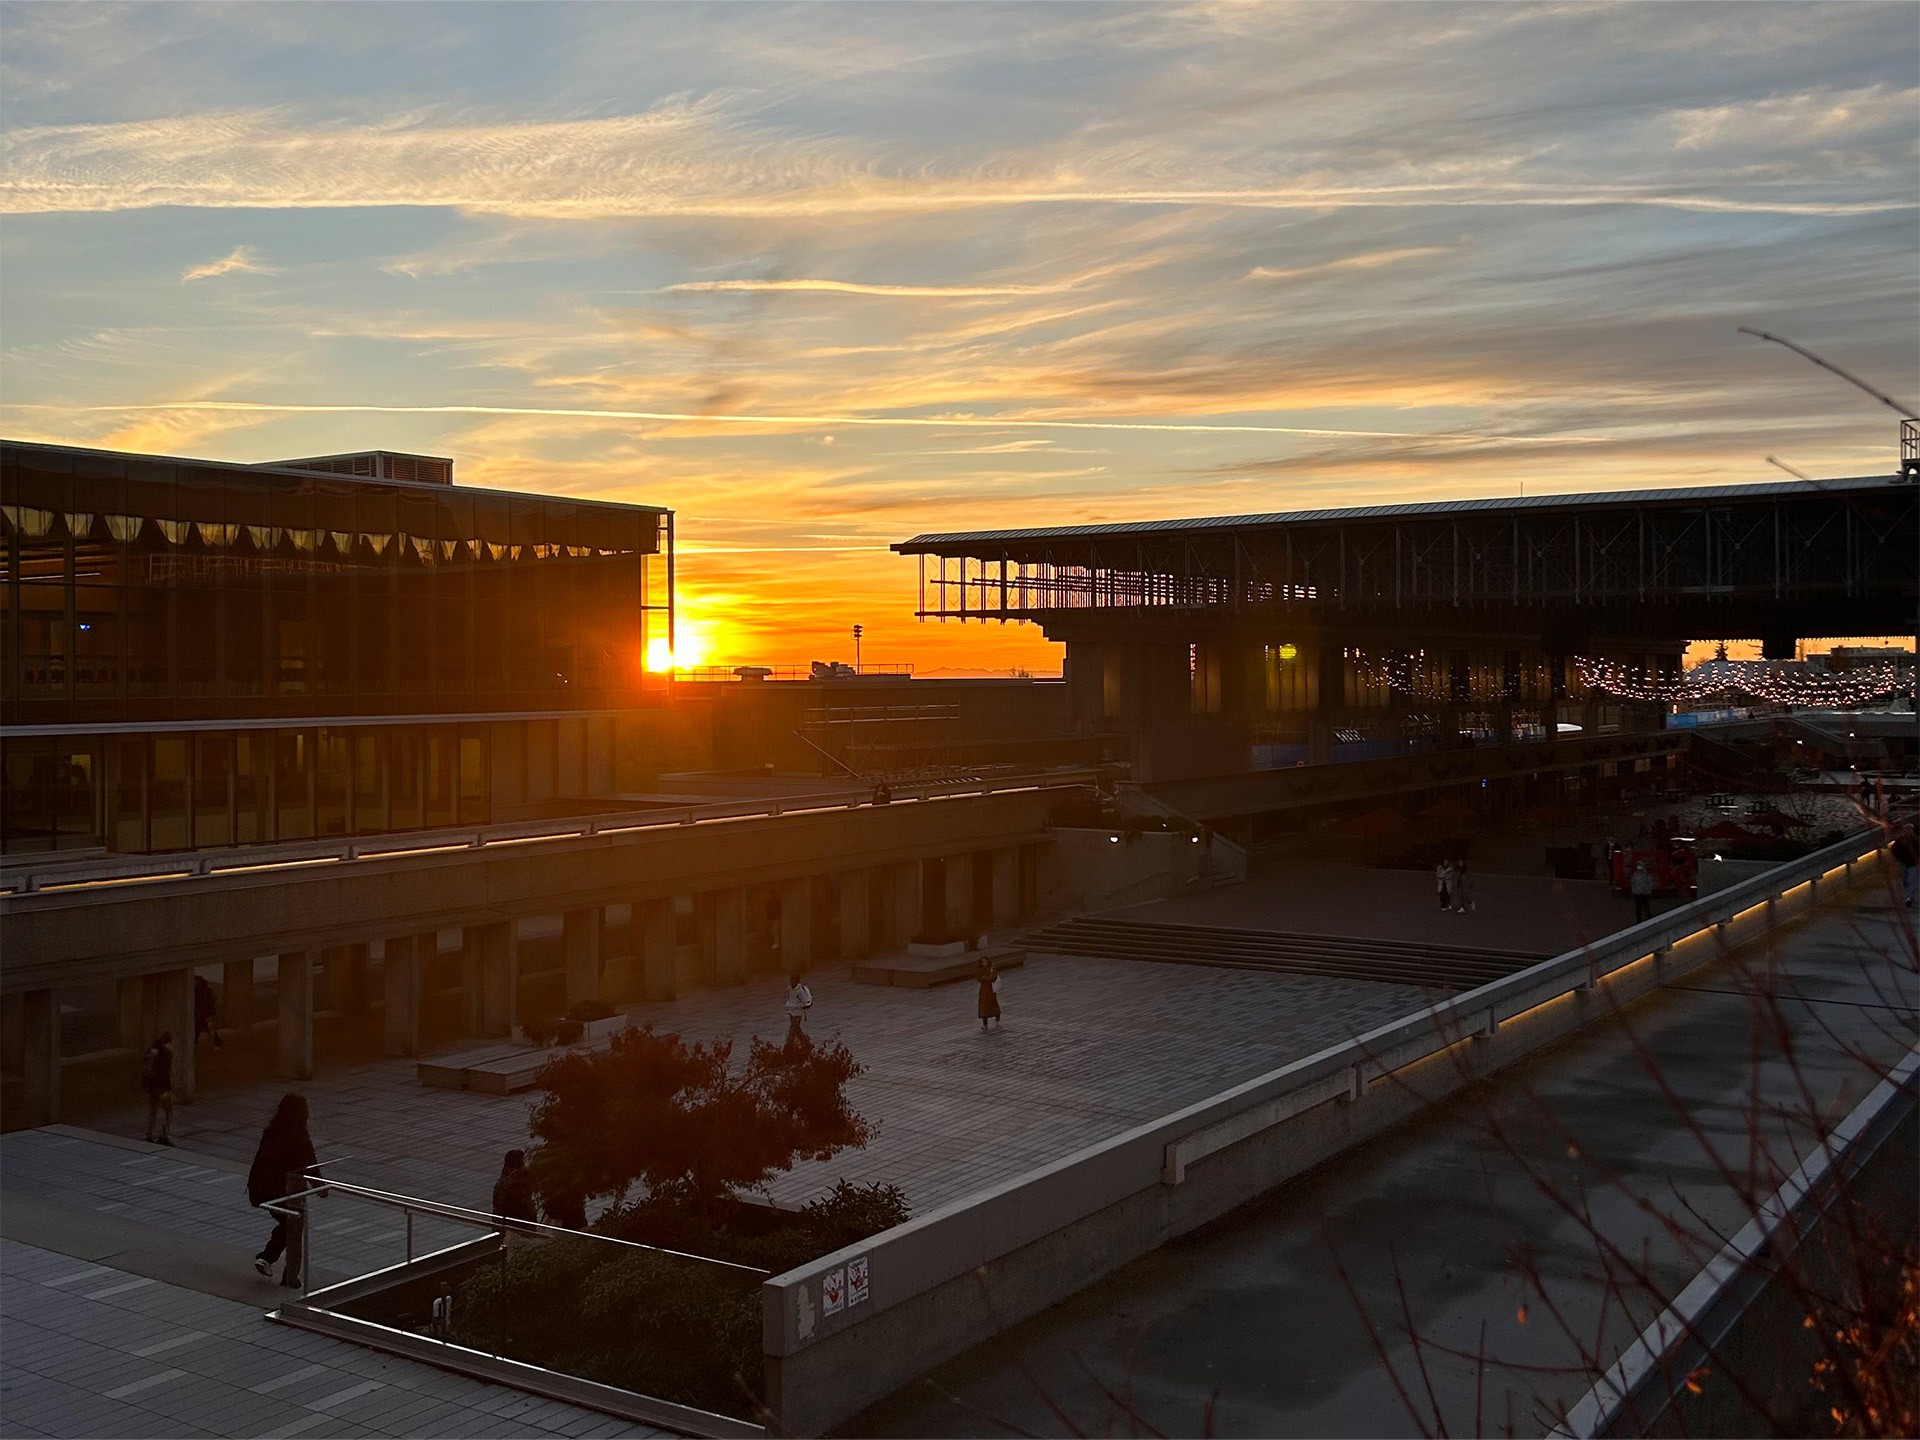 An image of the setting sun lighting the quad of SFU Burnaby campus.